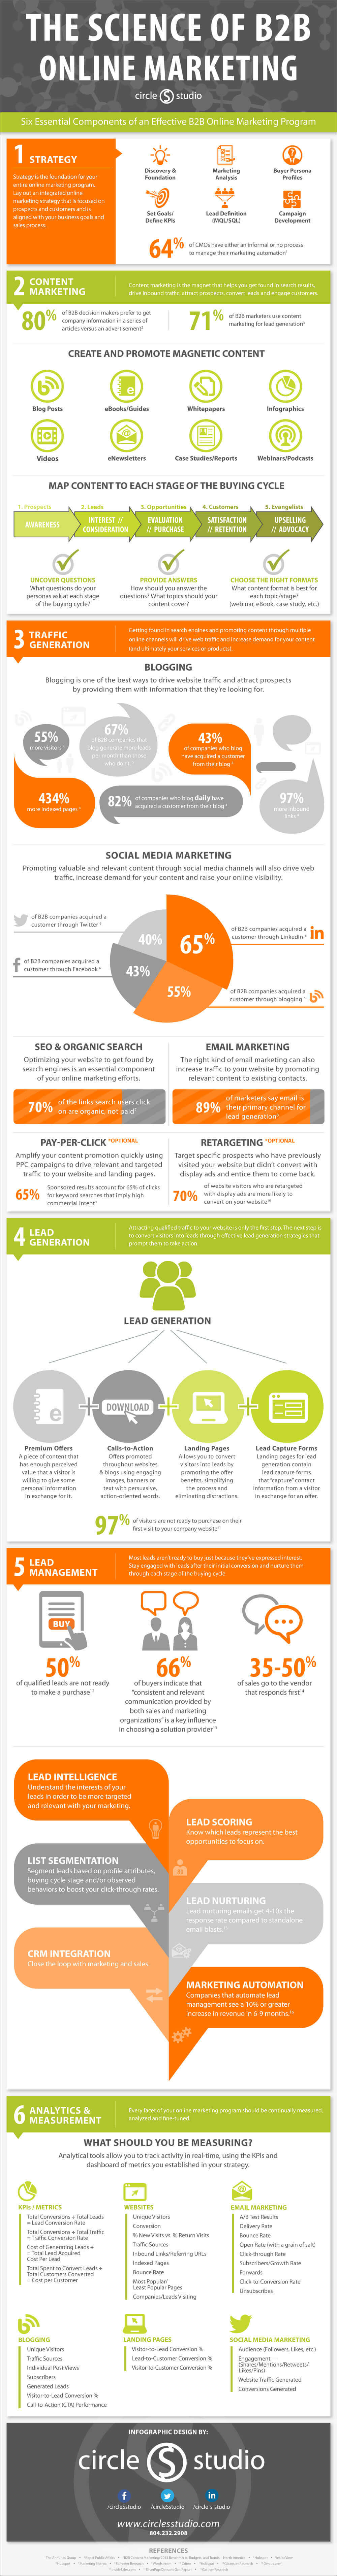 The Science of B2B Online Marketing [INFOGRAPHIC]